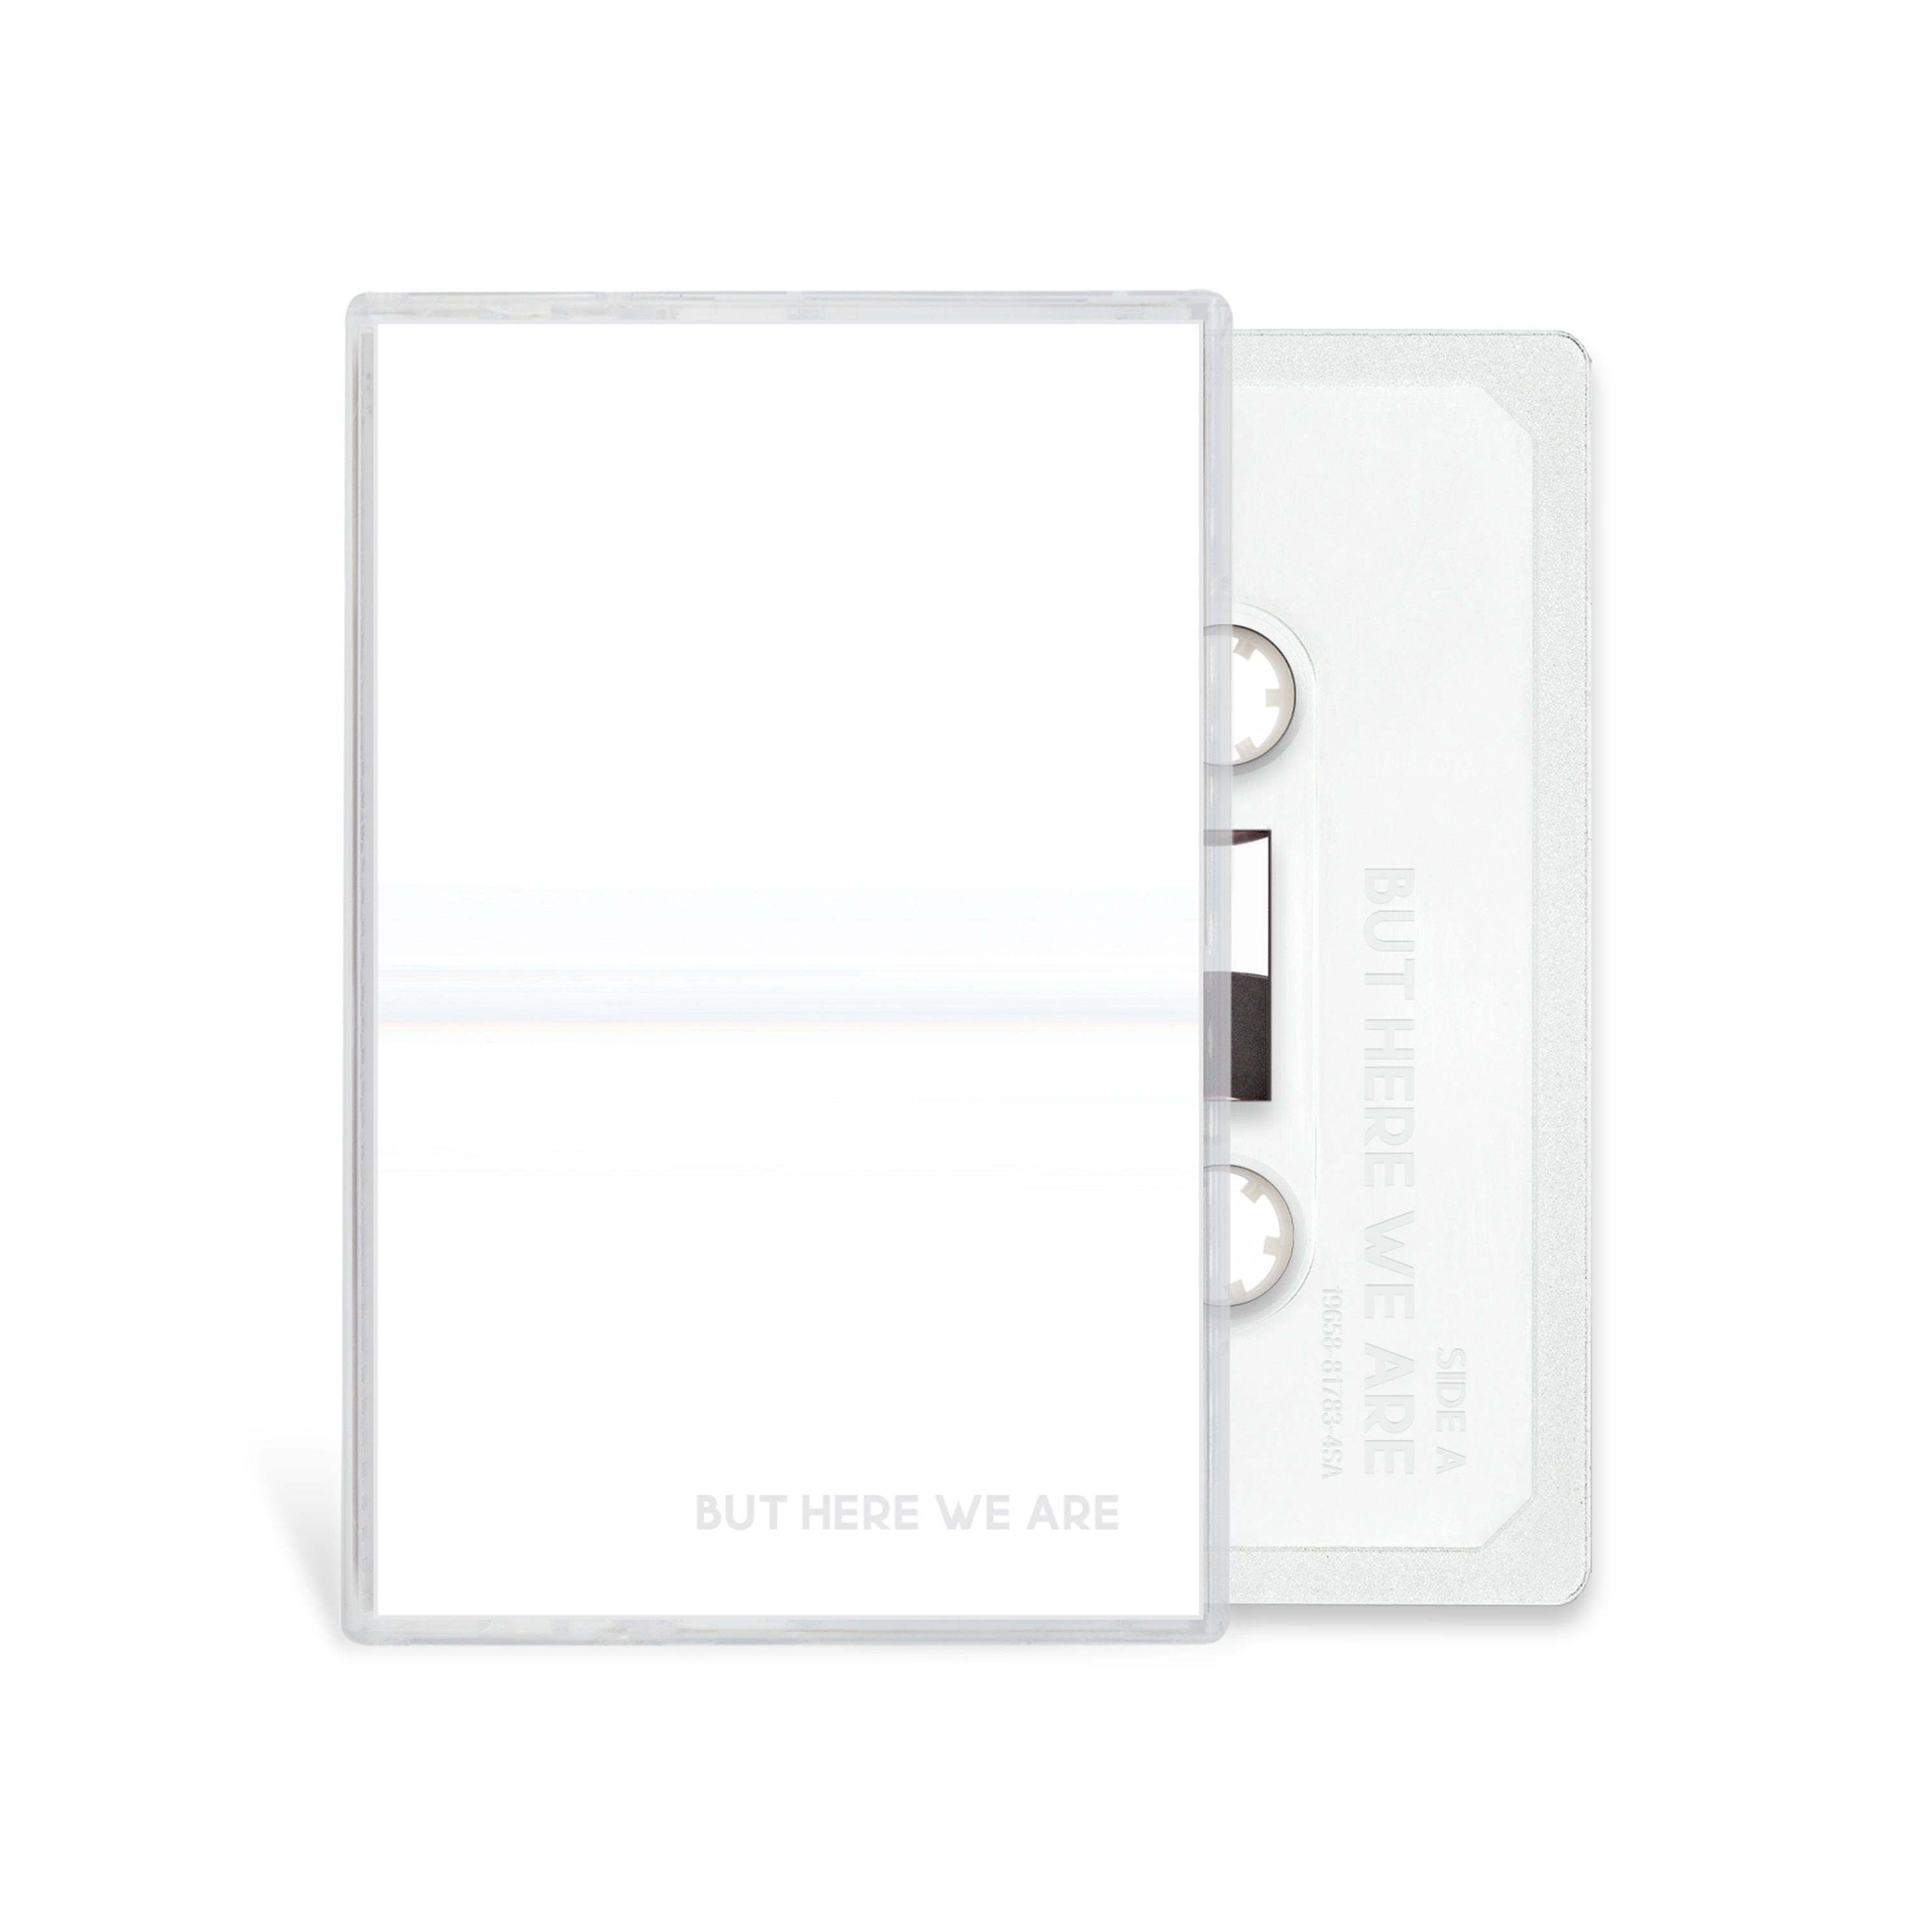 Foo Fighters- But Here We Are (White Cassette) (PREORDER) - Darkside Records